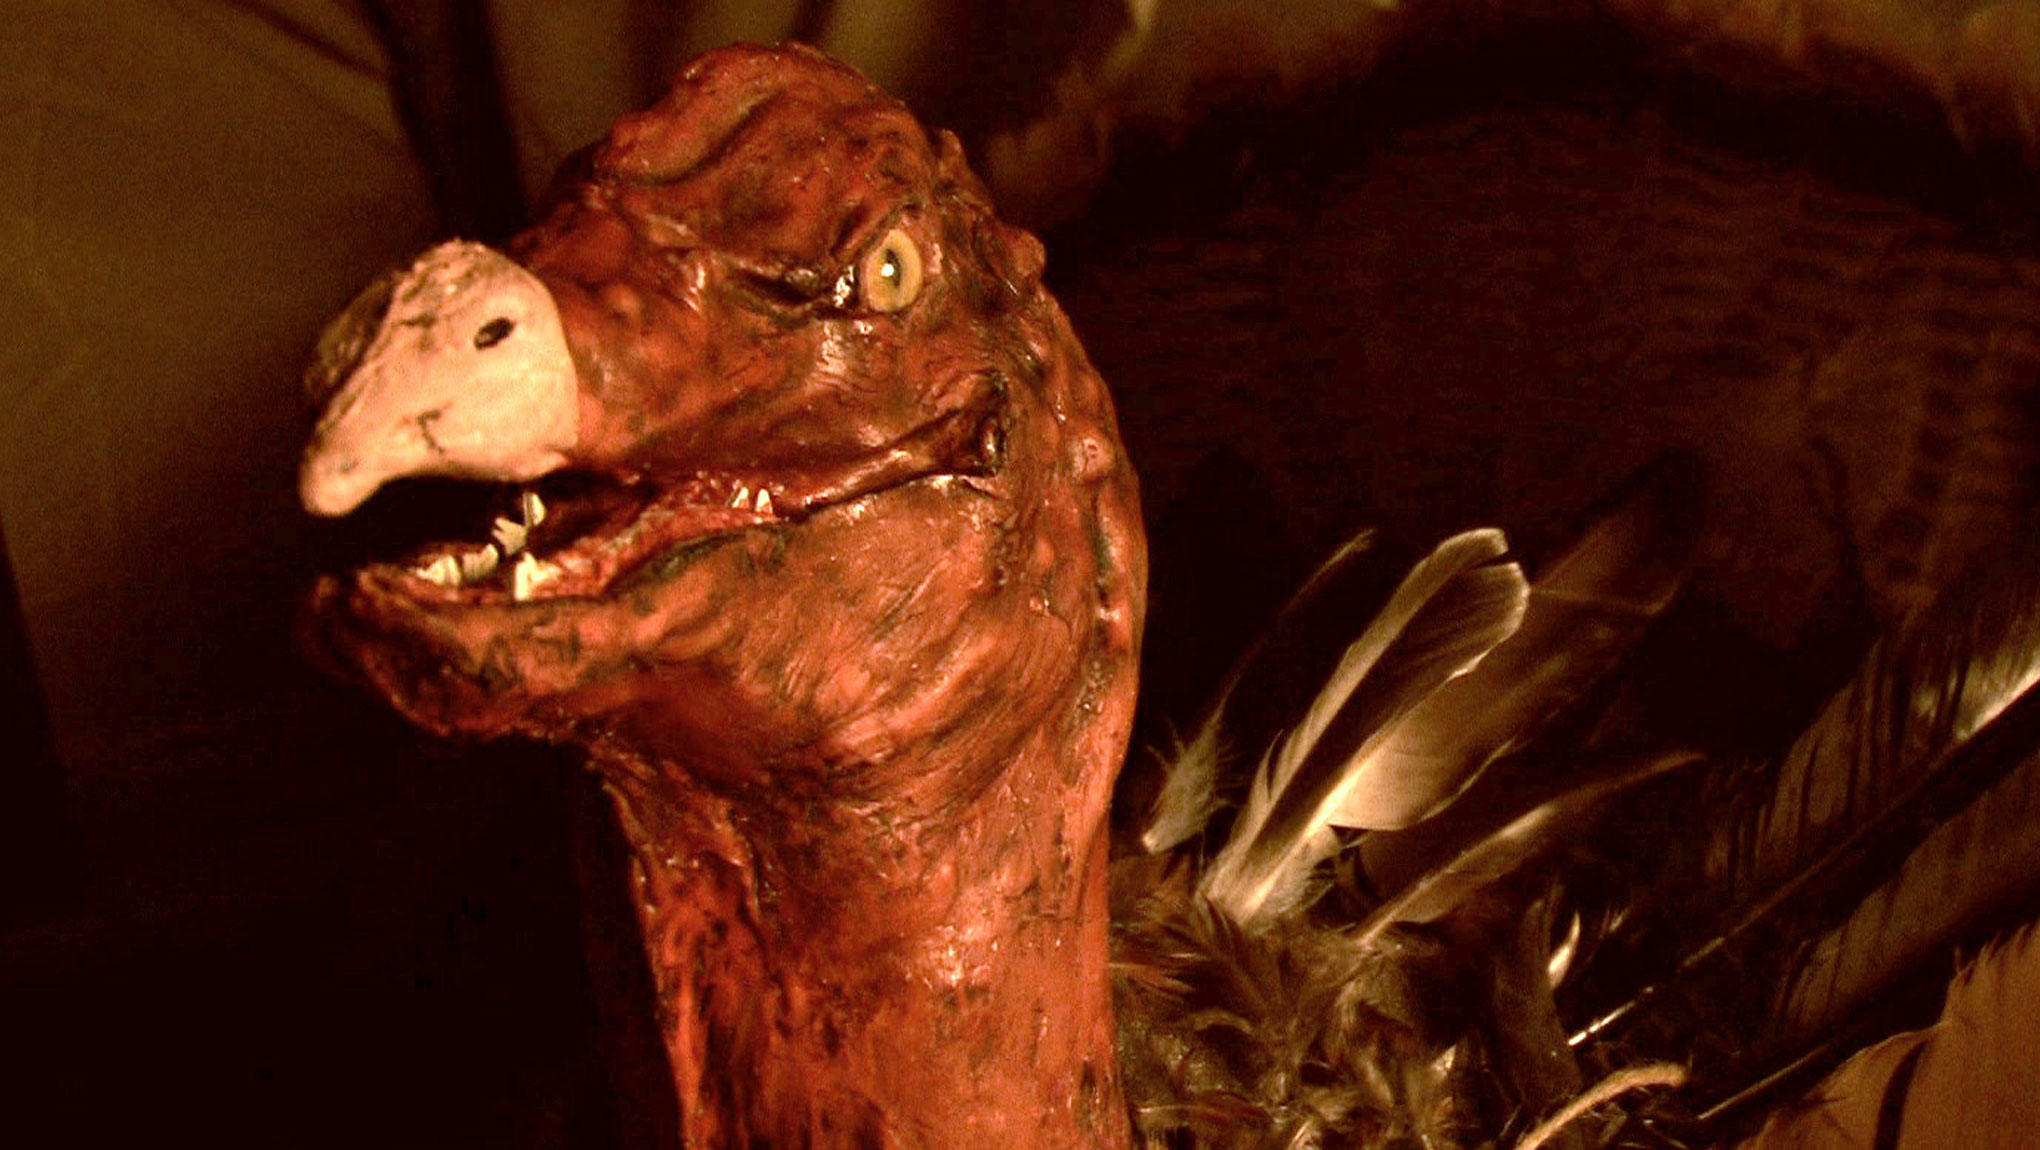 Why yes, that's a killer turkey, from ThanksKilling. (Image: In Broad Daylight Films)